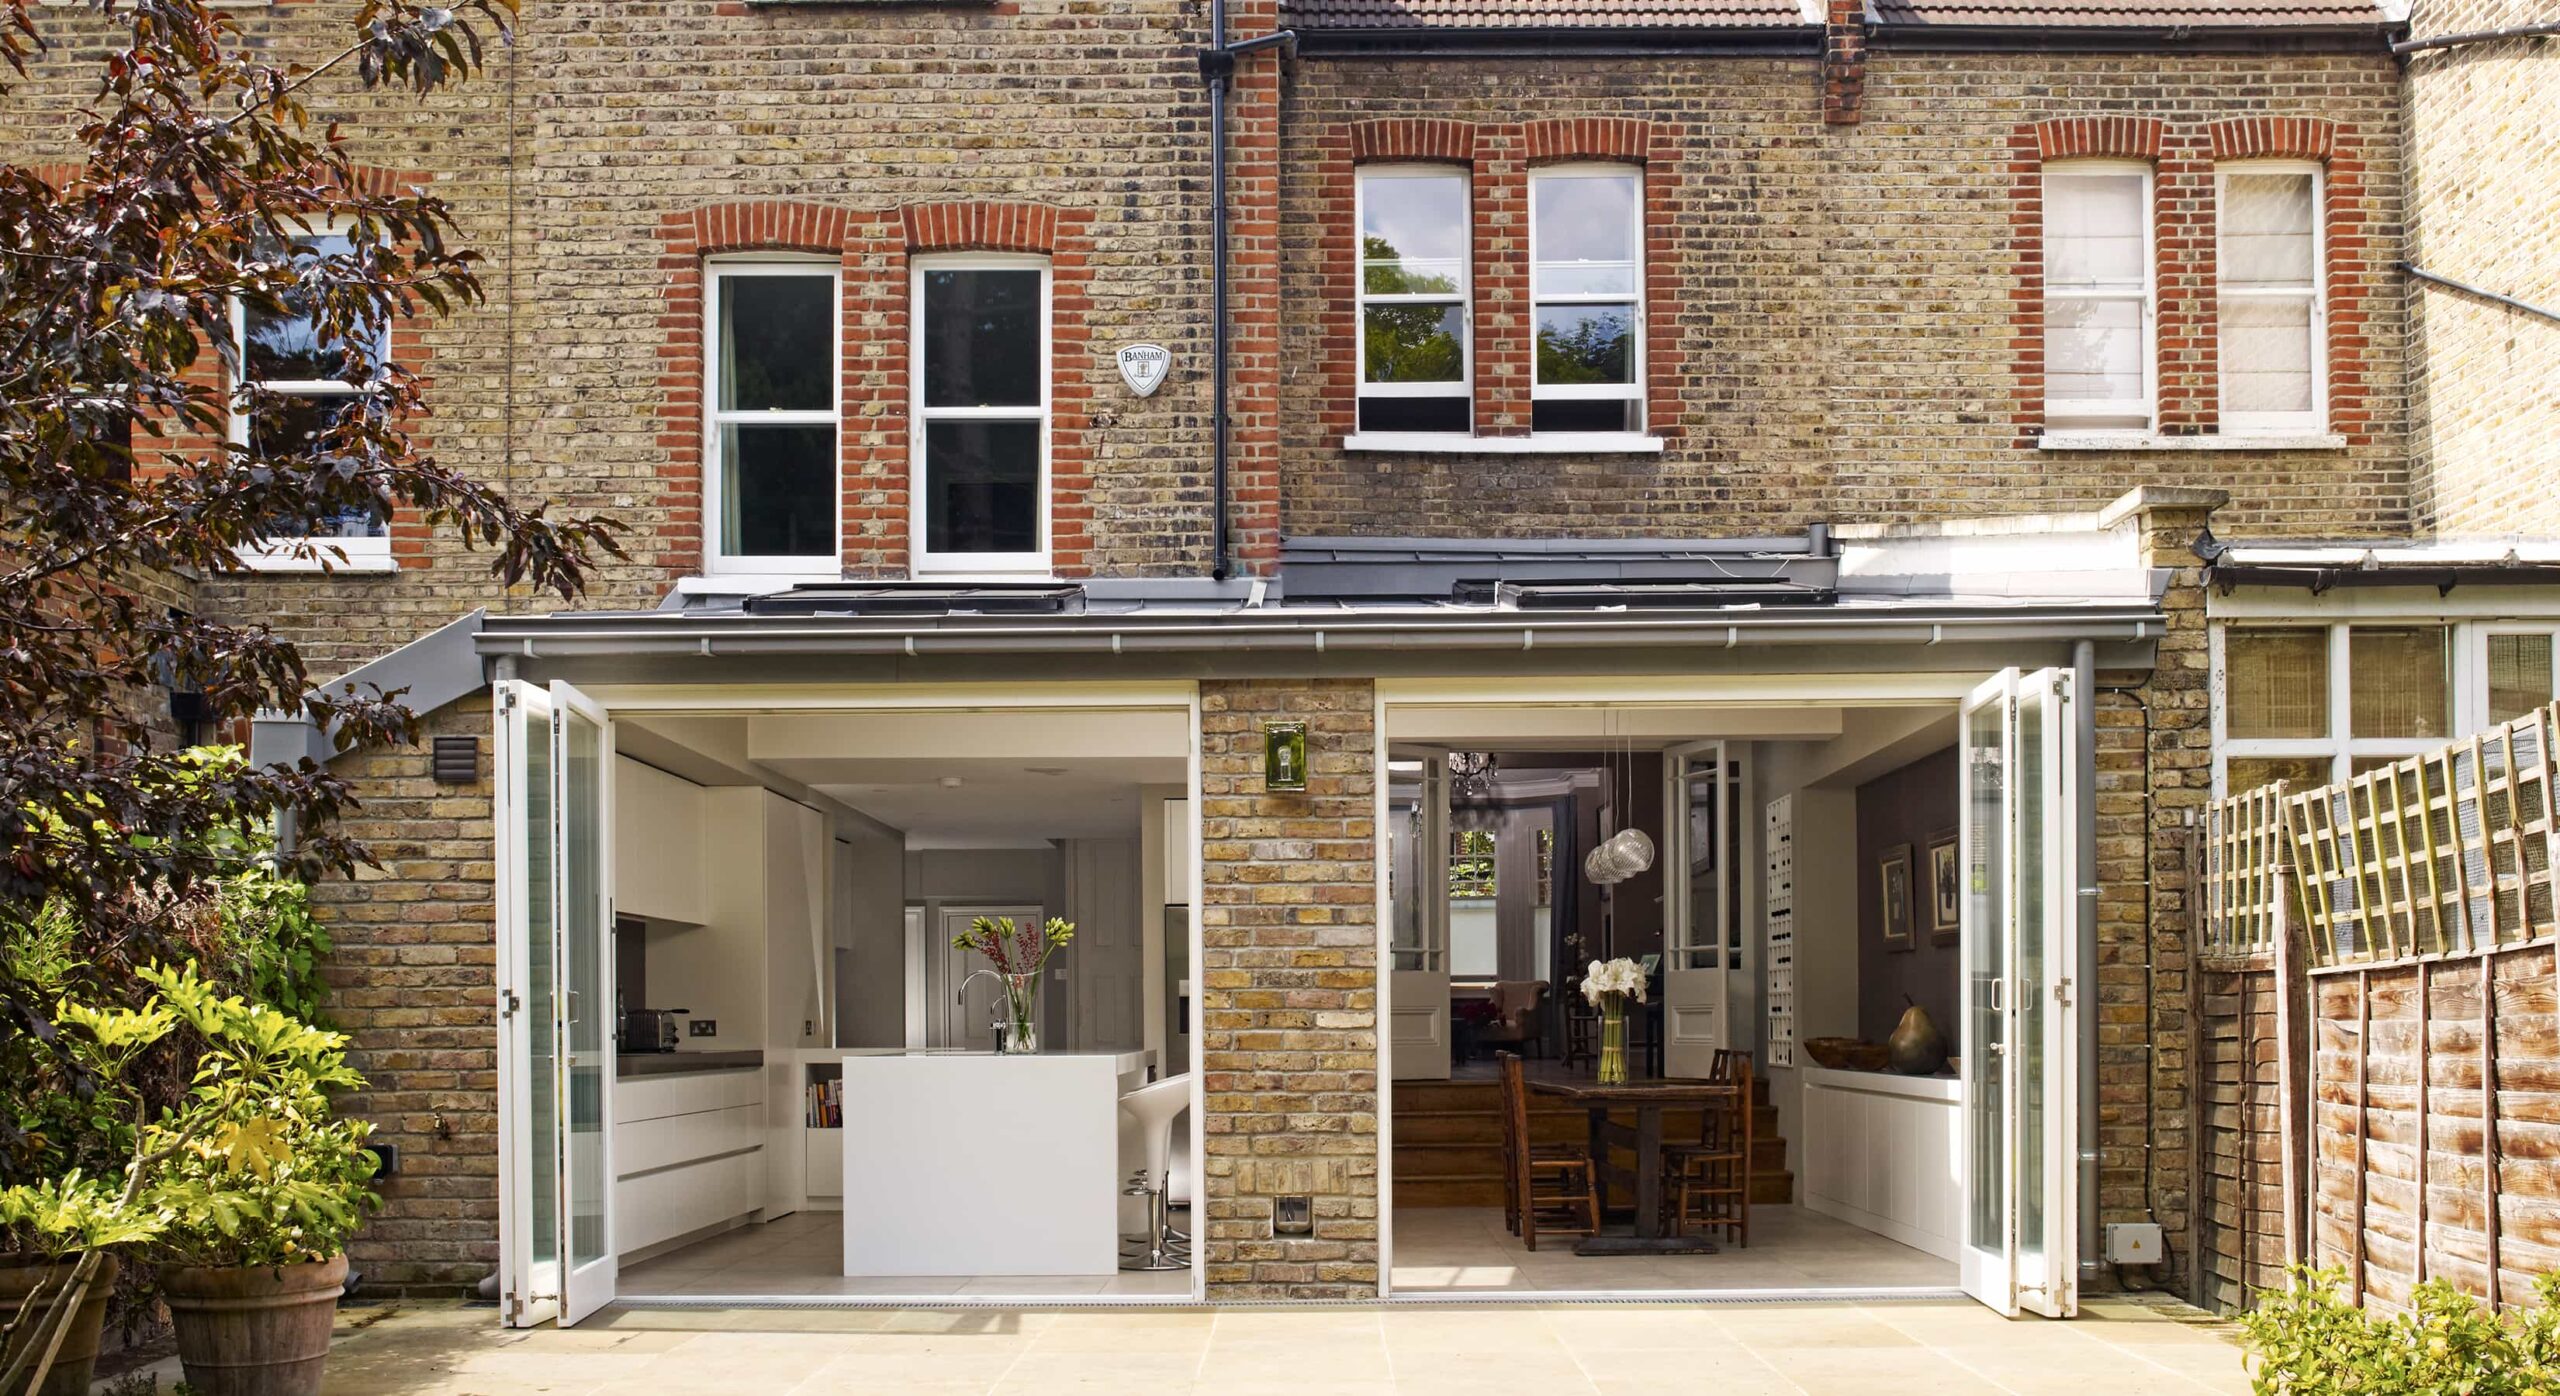 Exterior of the Esmund kitchen extension with by-fold doors open